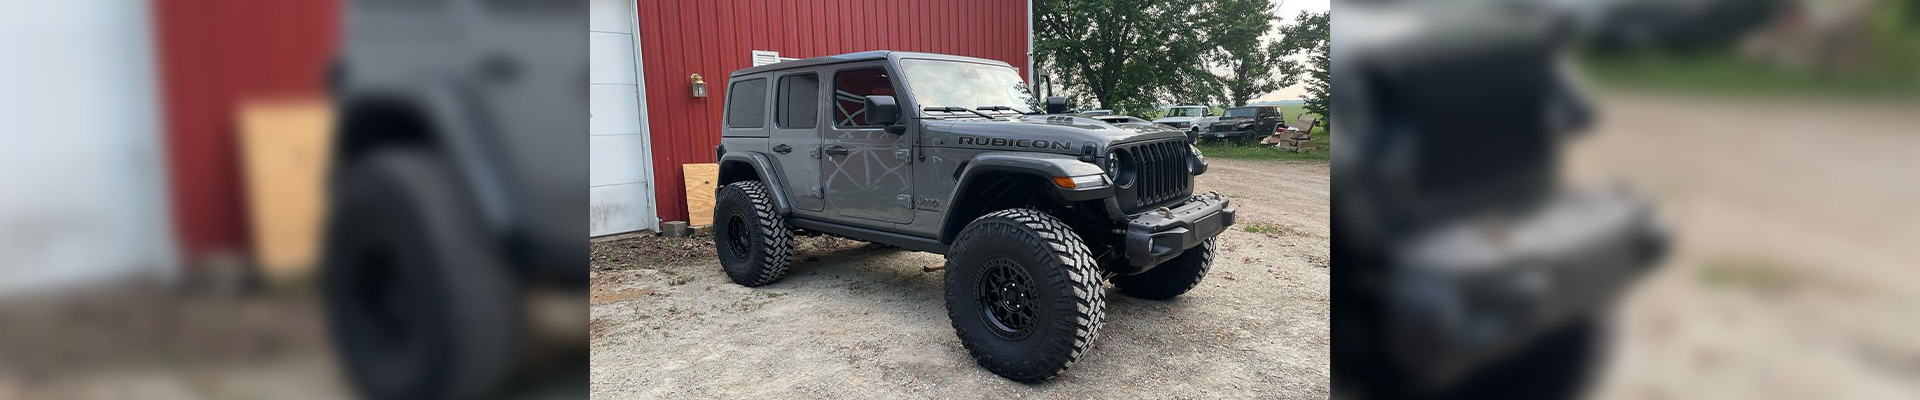 Jeep-Rubicon-Gallery-image-7.png